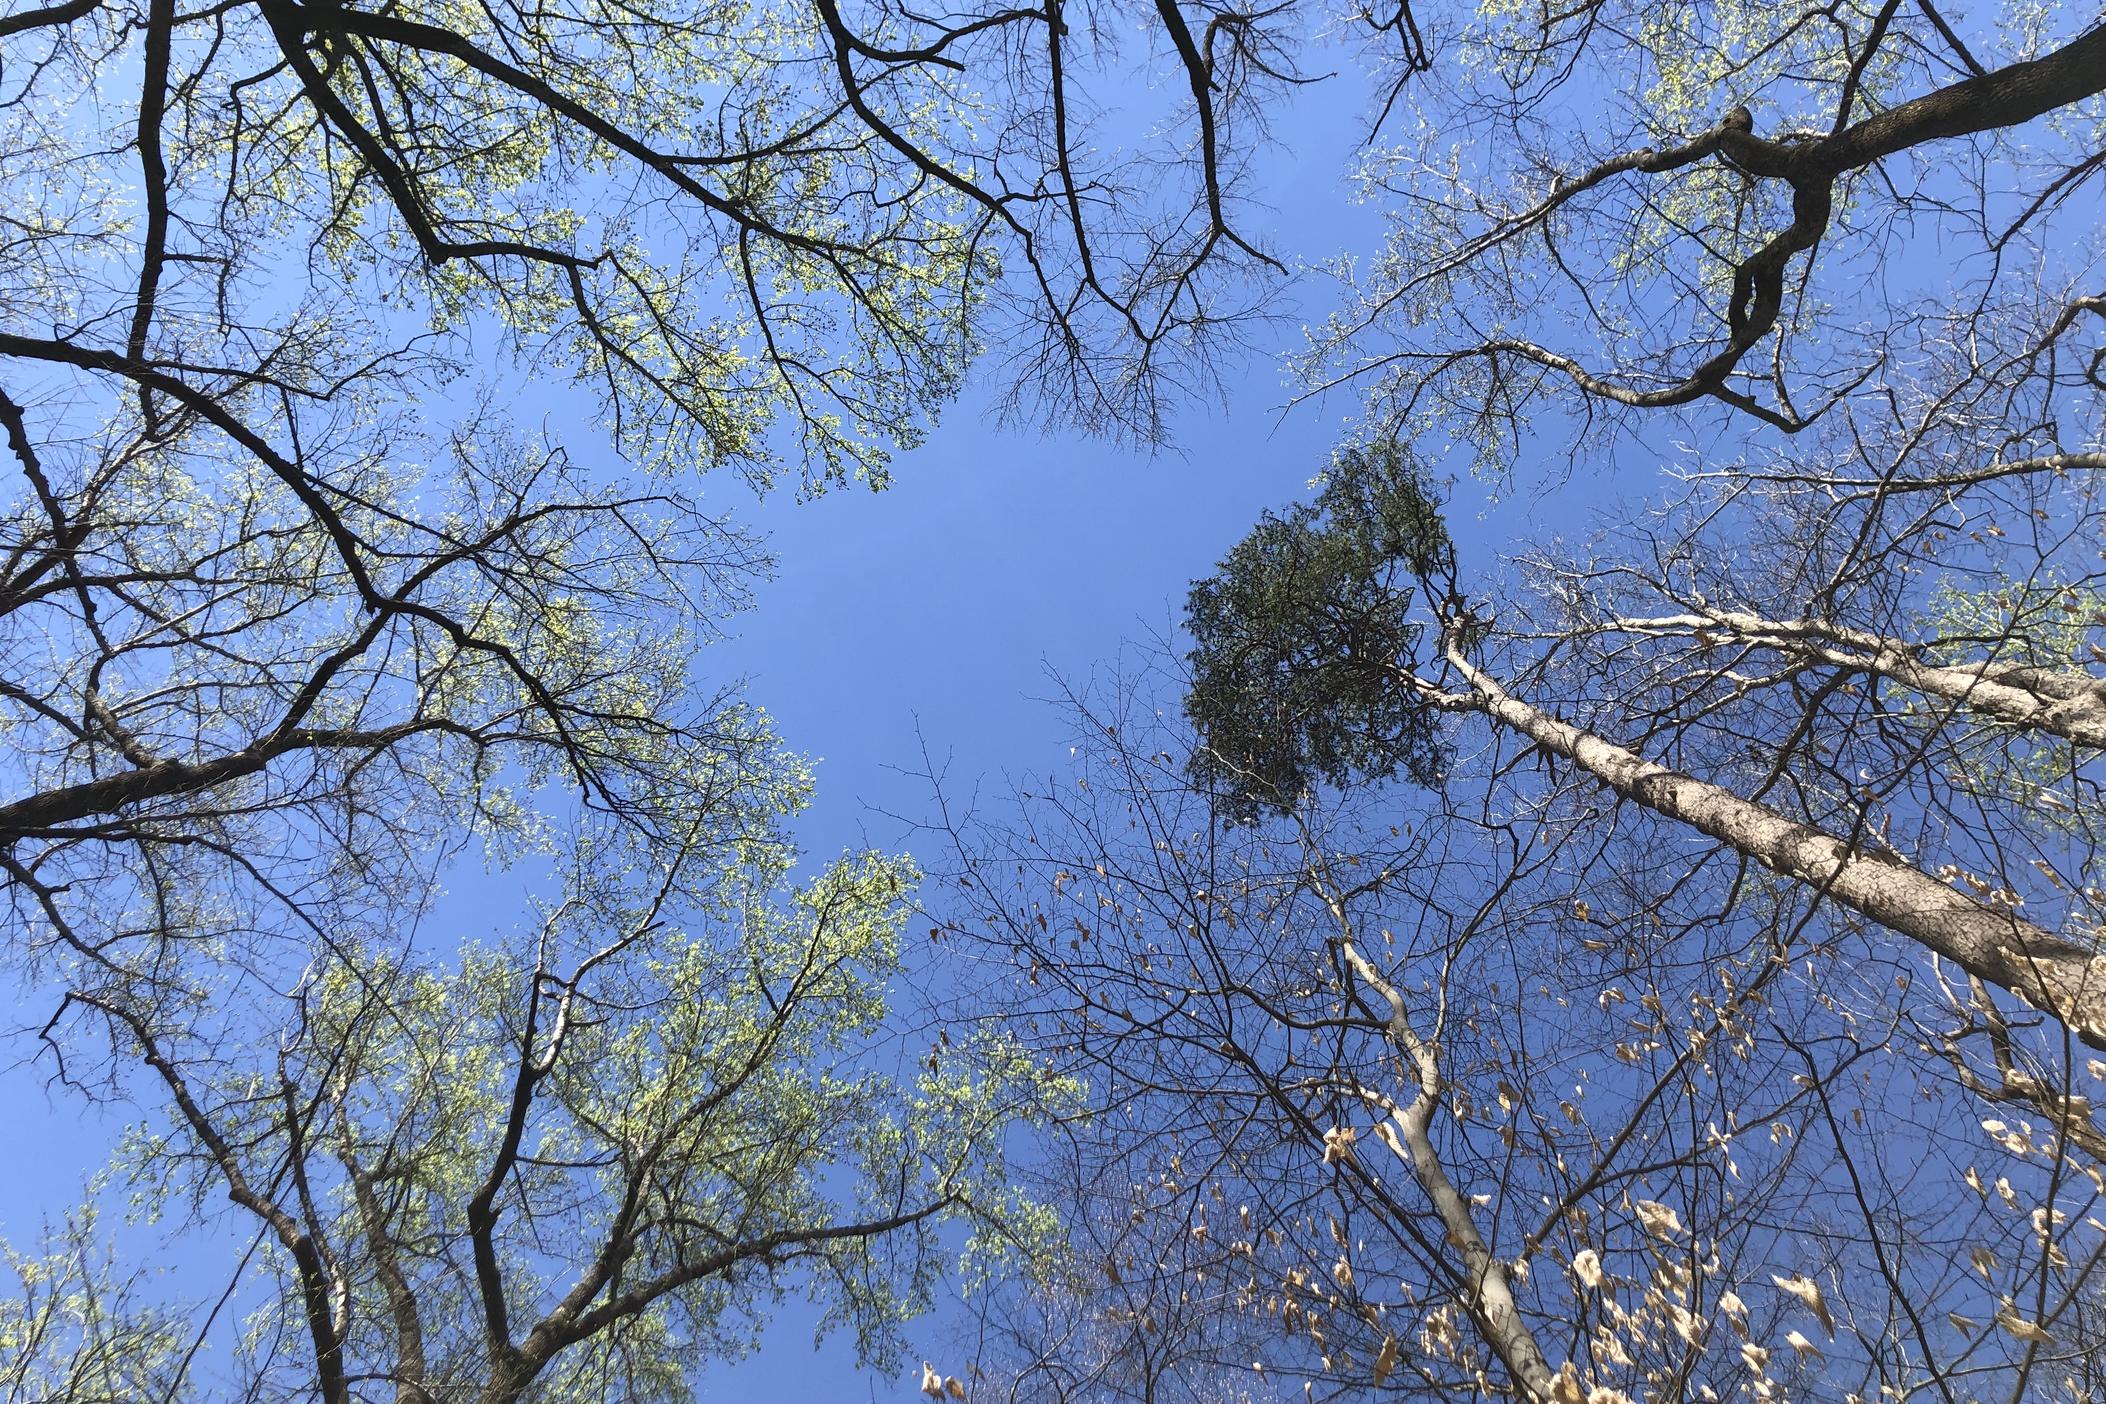 A picture of the tree canopy at the Fernbank Museum's 65-acre forest.